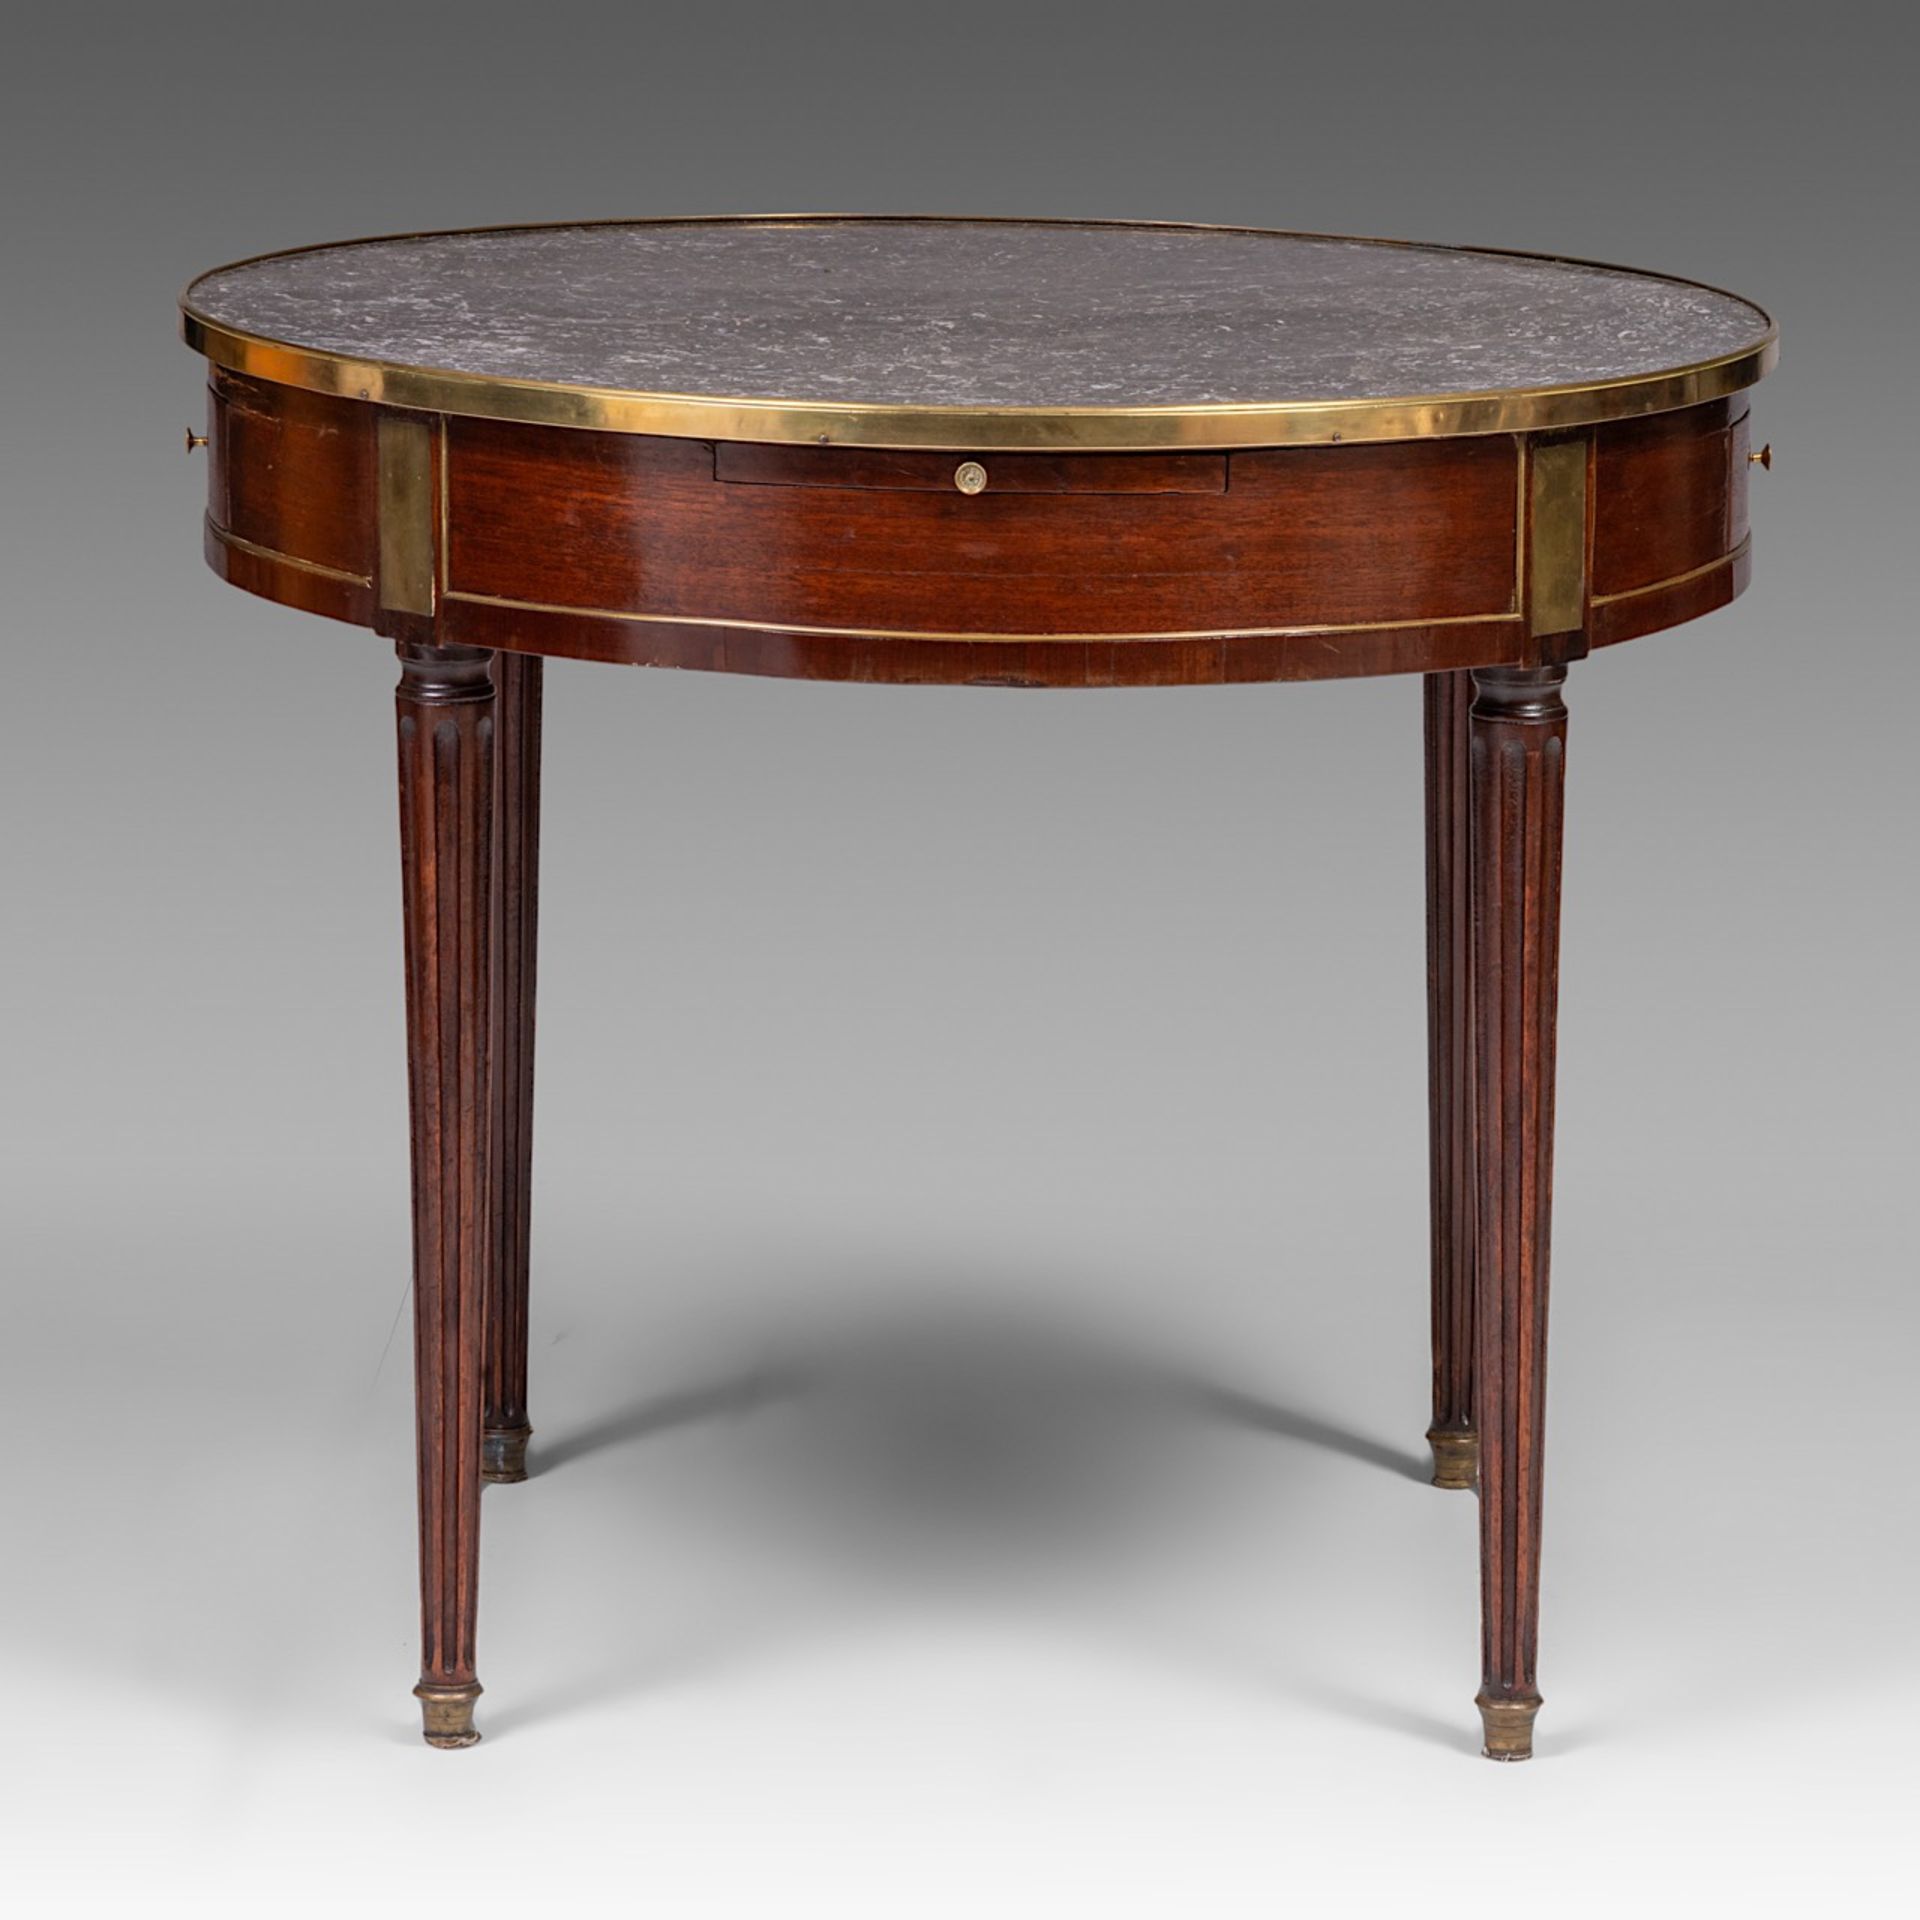 A Louis XVI bouillotte table with a marble top and gilded bronze mounts, H 73 - dia 85 cm - Image 3 of 8